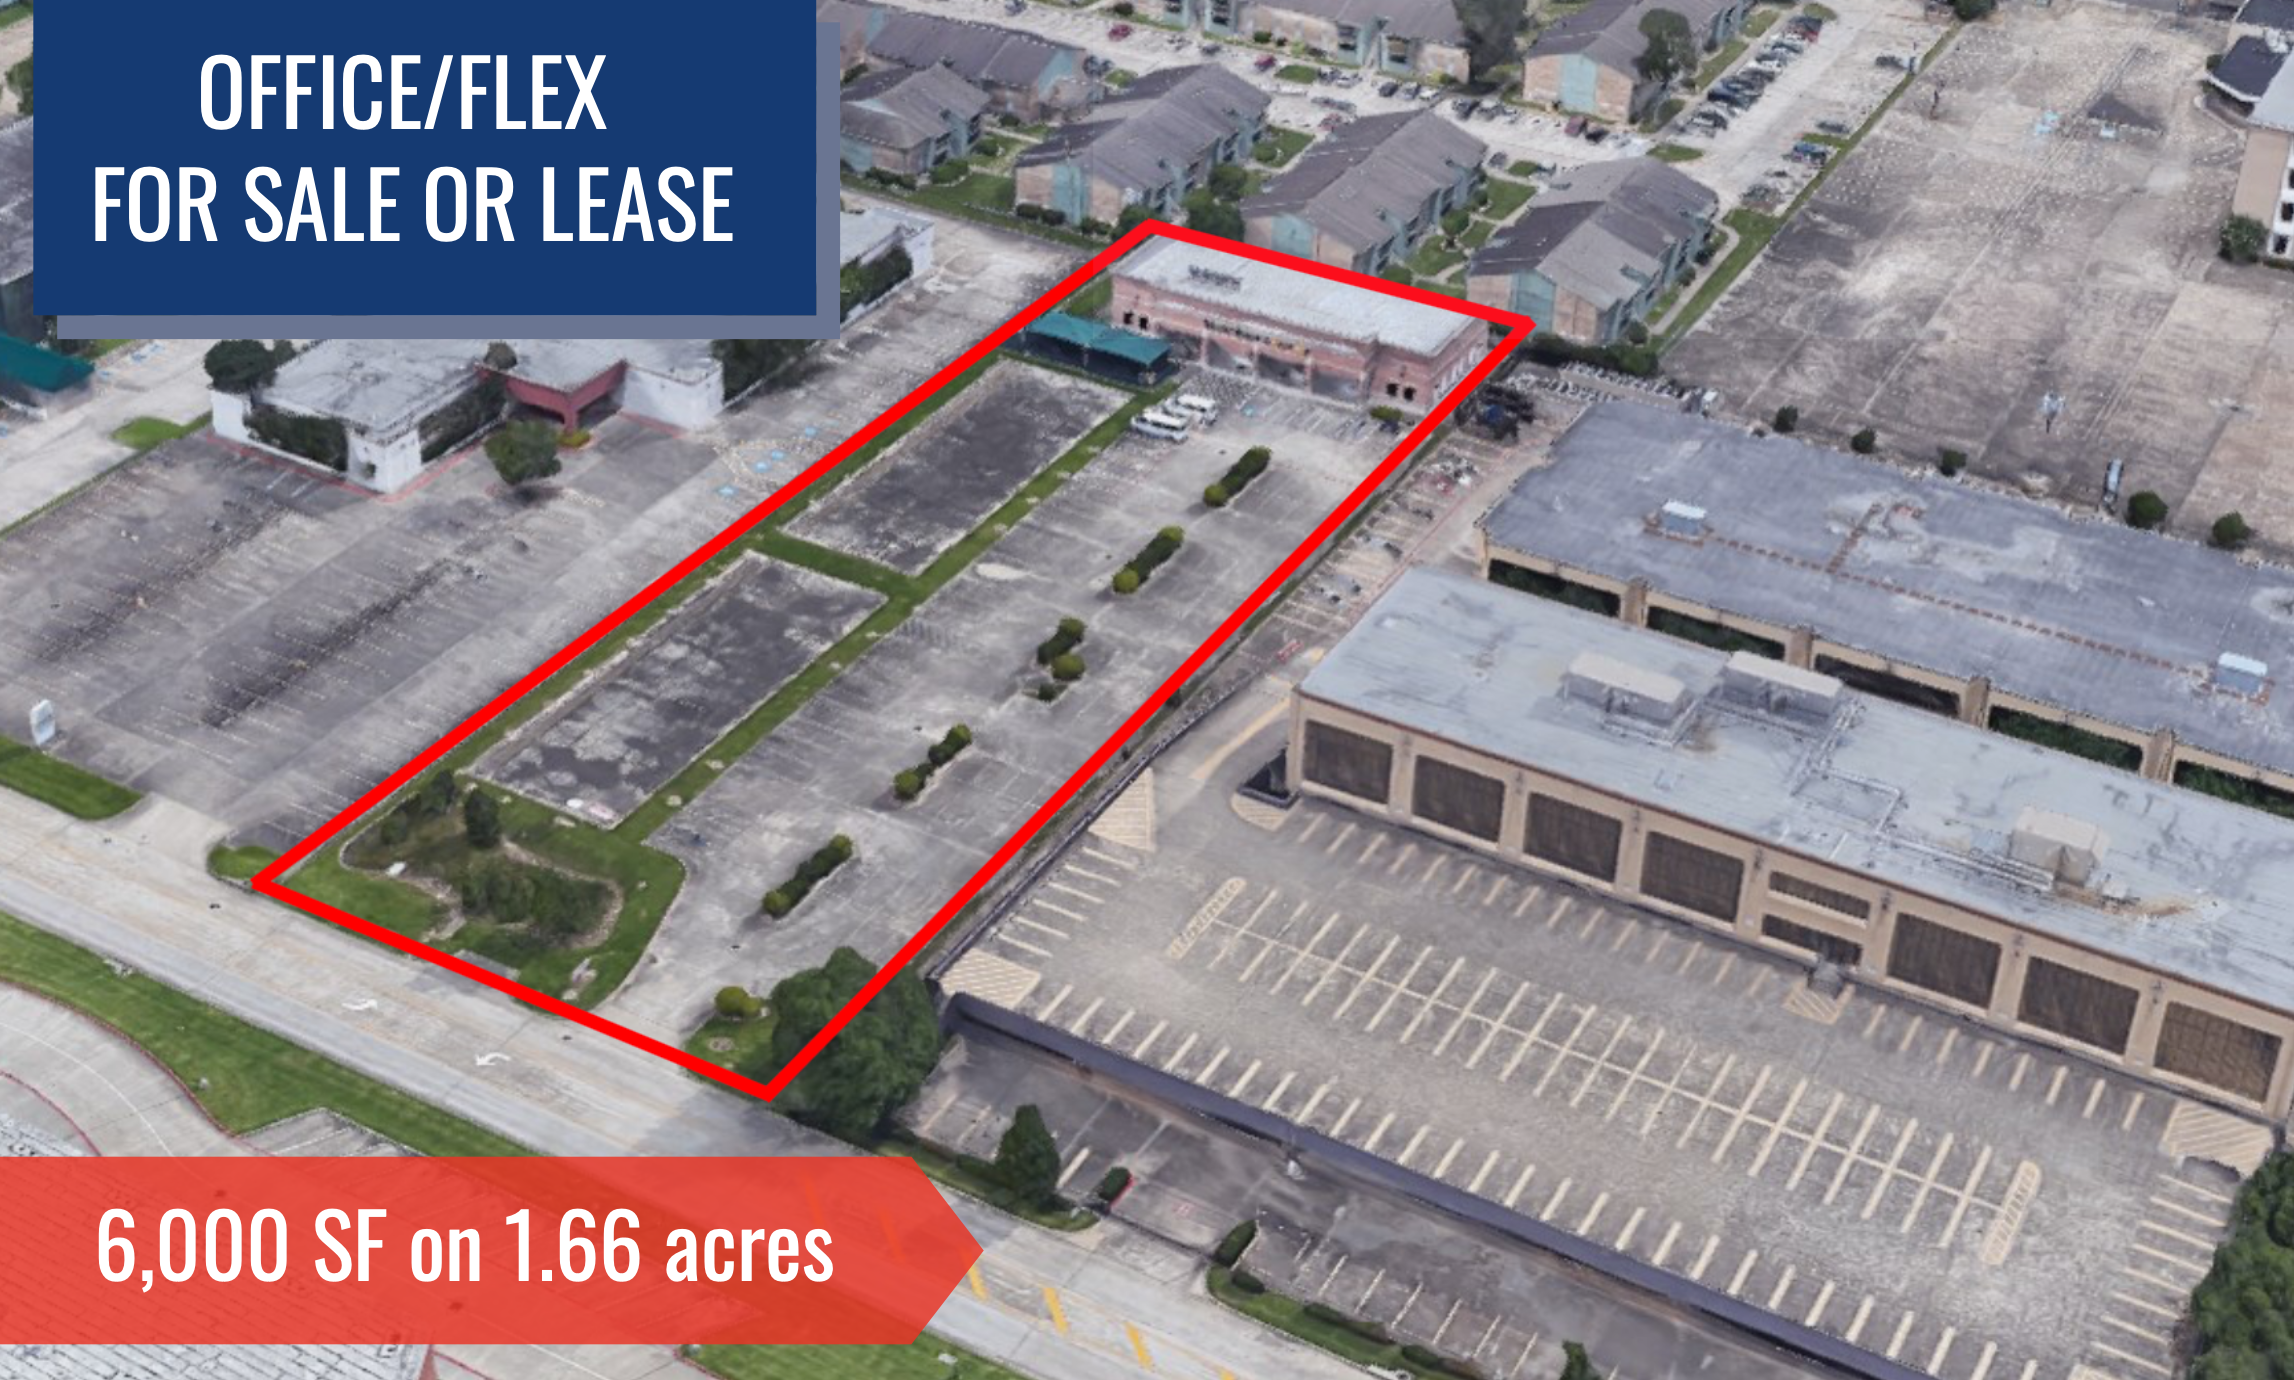 Must Sell Flex Warehouse for Sale w/2 BTS Slabs Ready